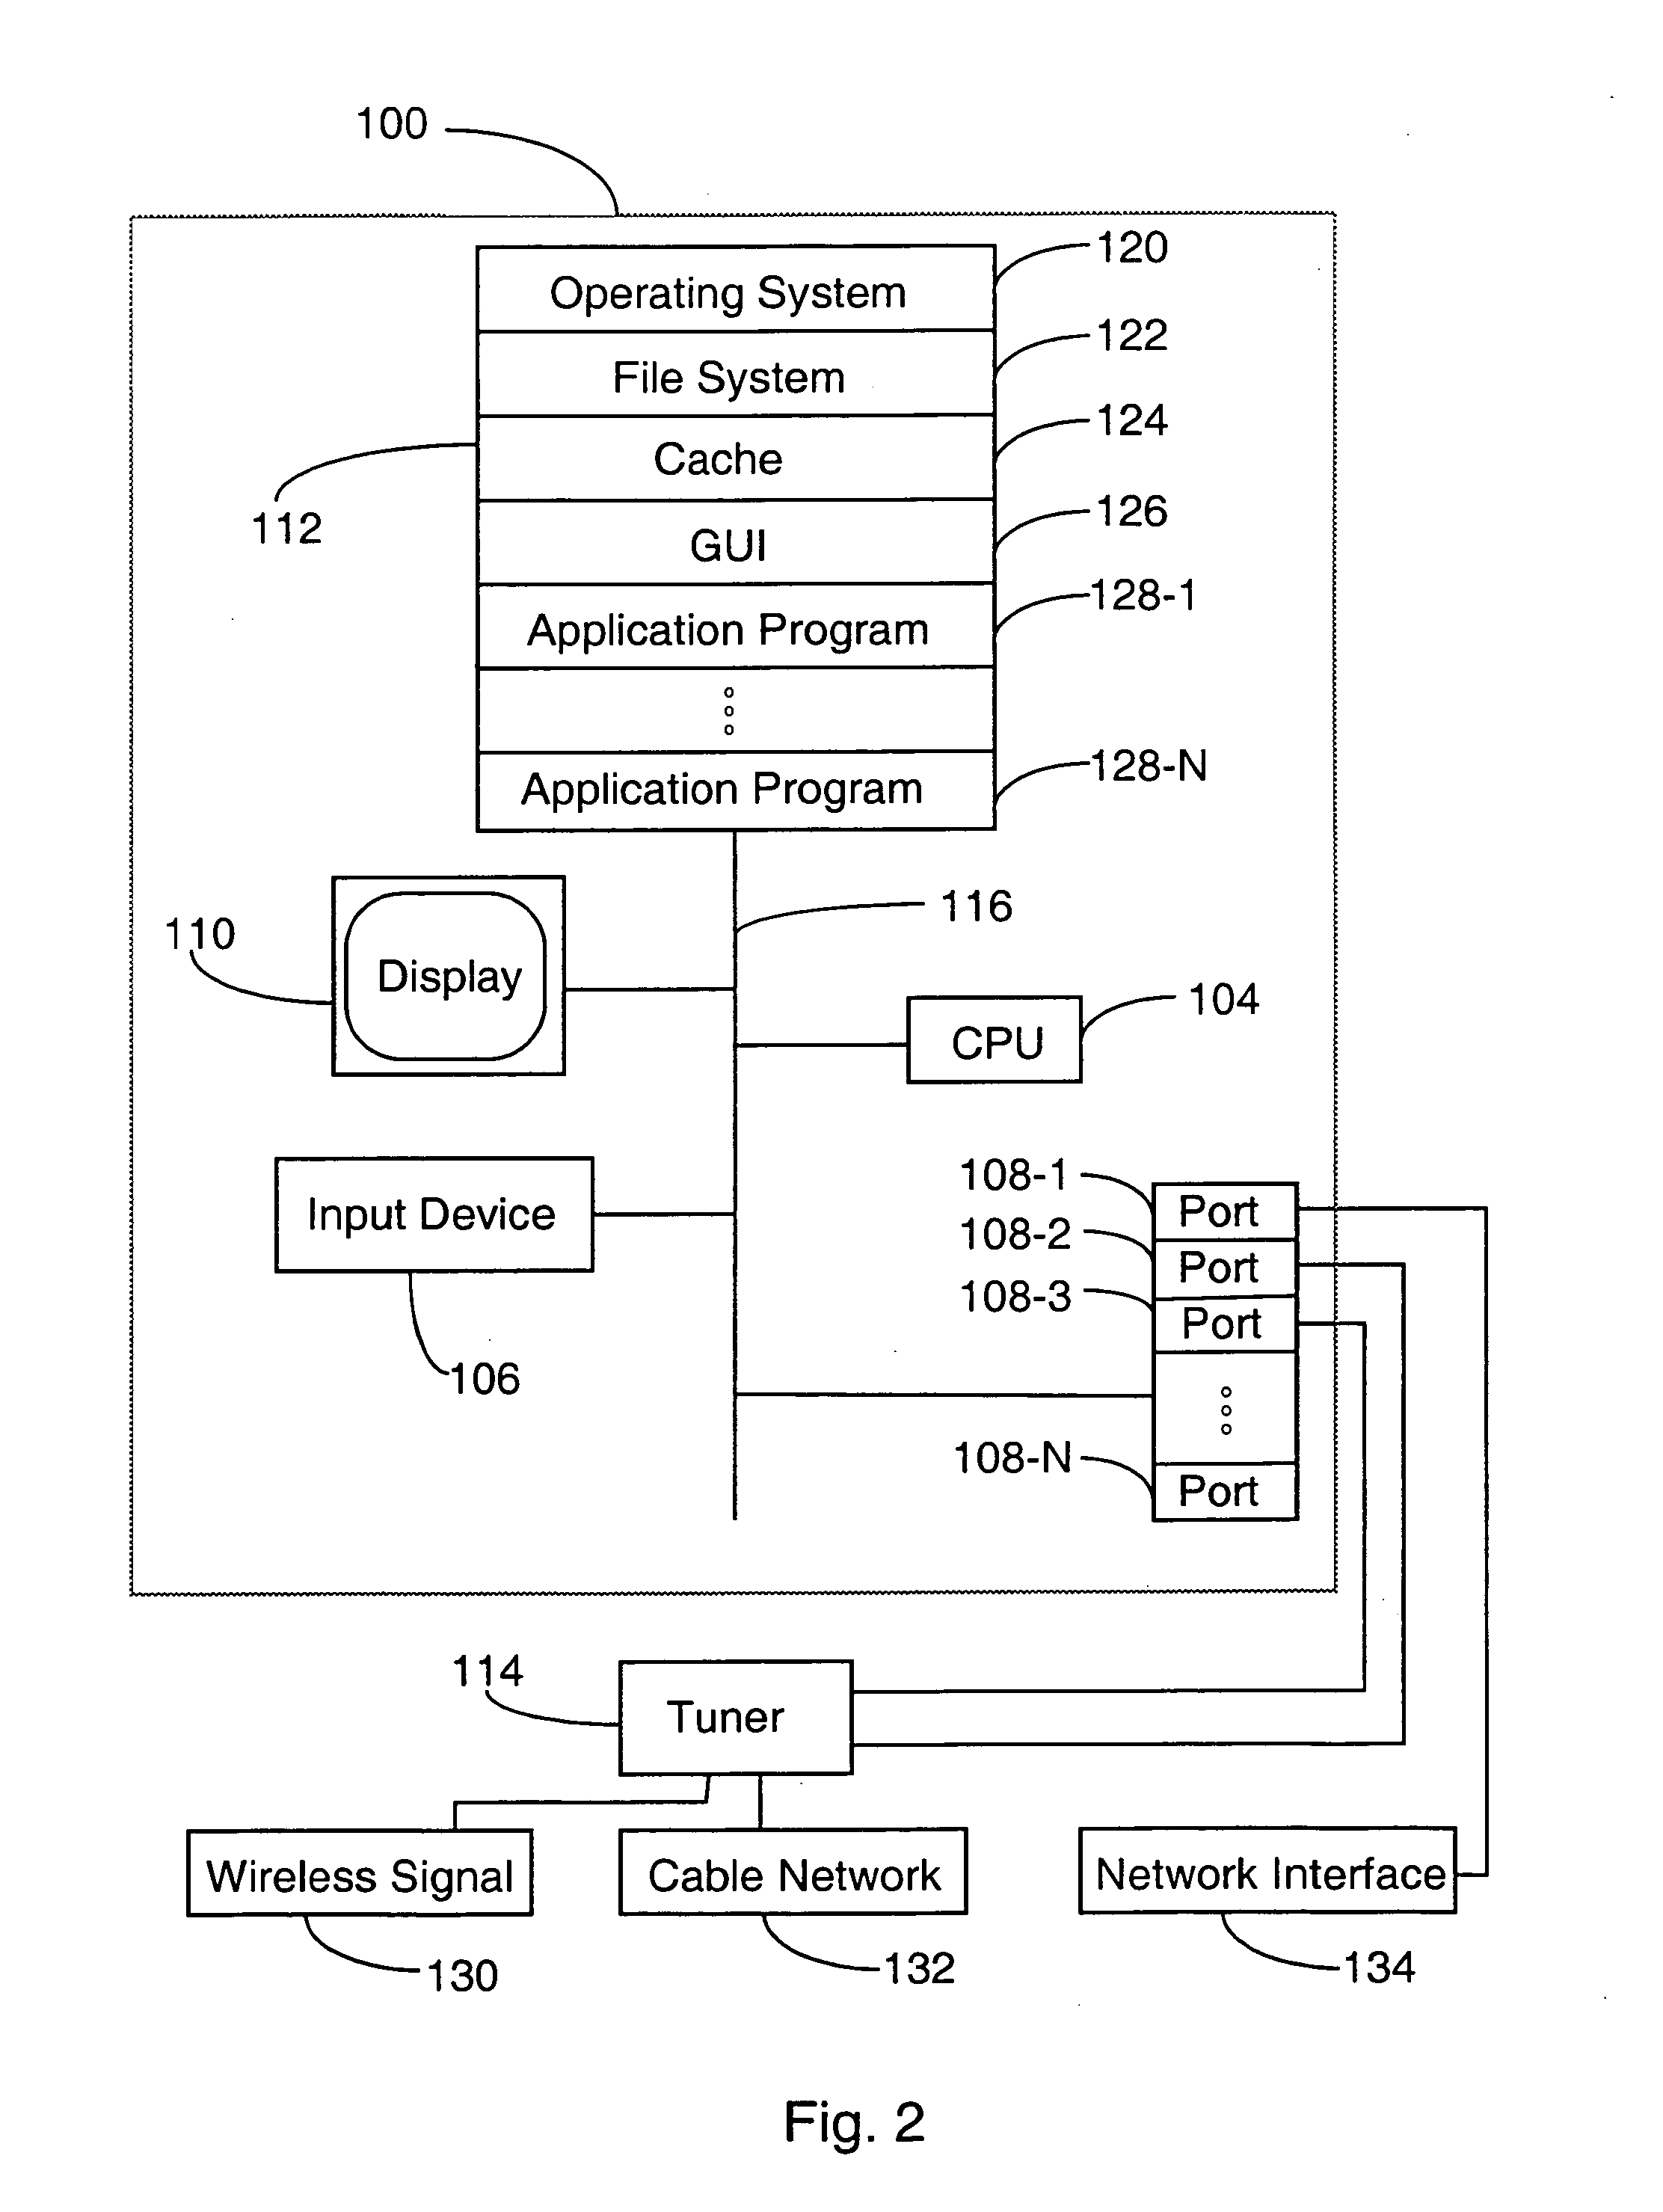 System and method for simultaneous display of multiple information sources